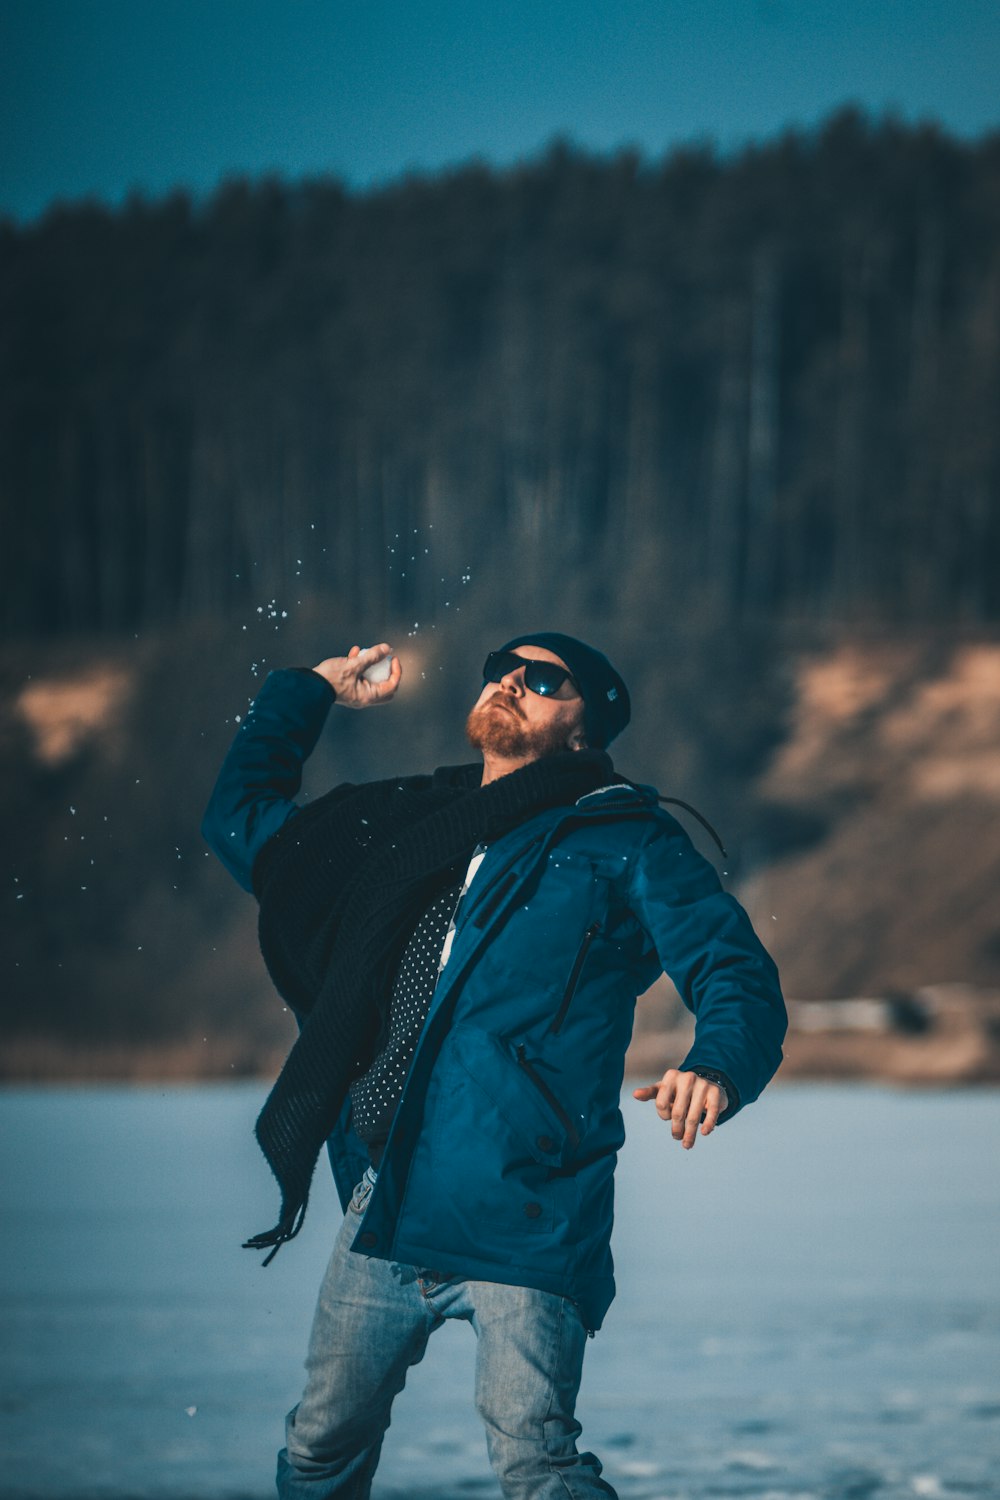 selective focus photography of man throwing snowball